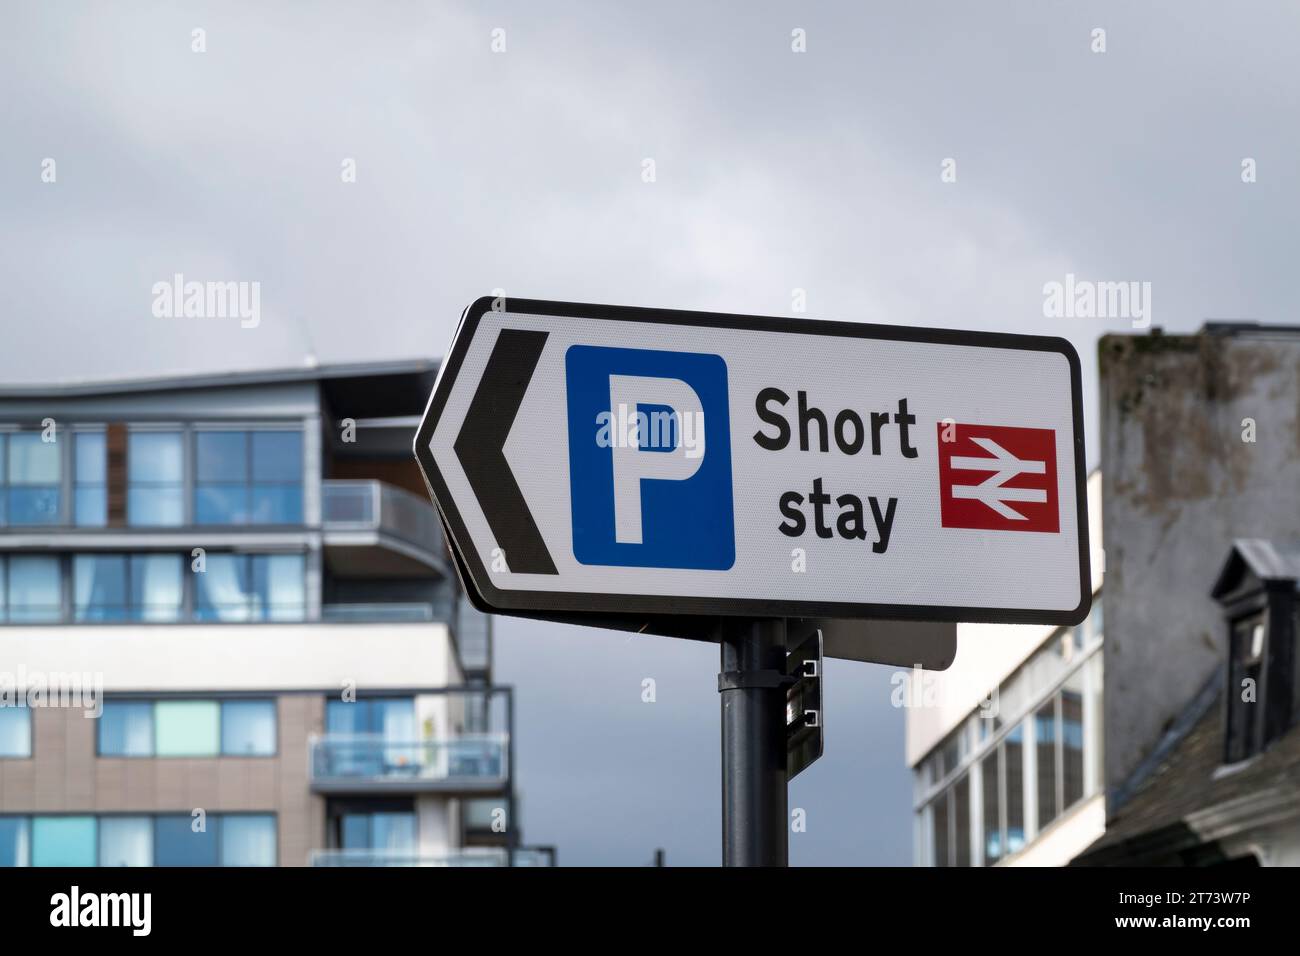 Short stay parking sign for railway station, St Mary's Road, Lincoln City, Lincolnshire, England, UK Stock Photo